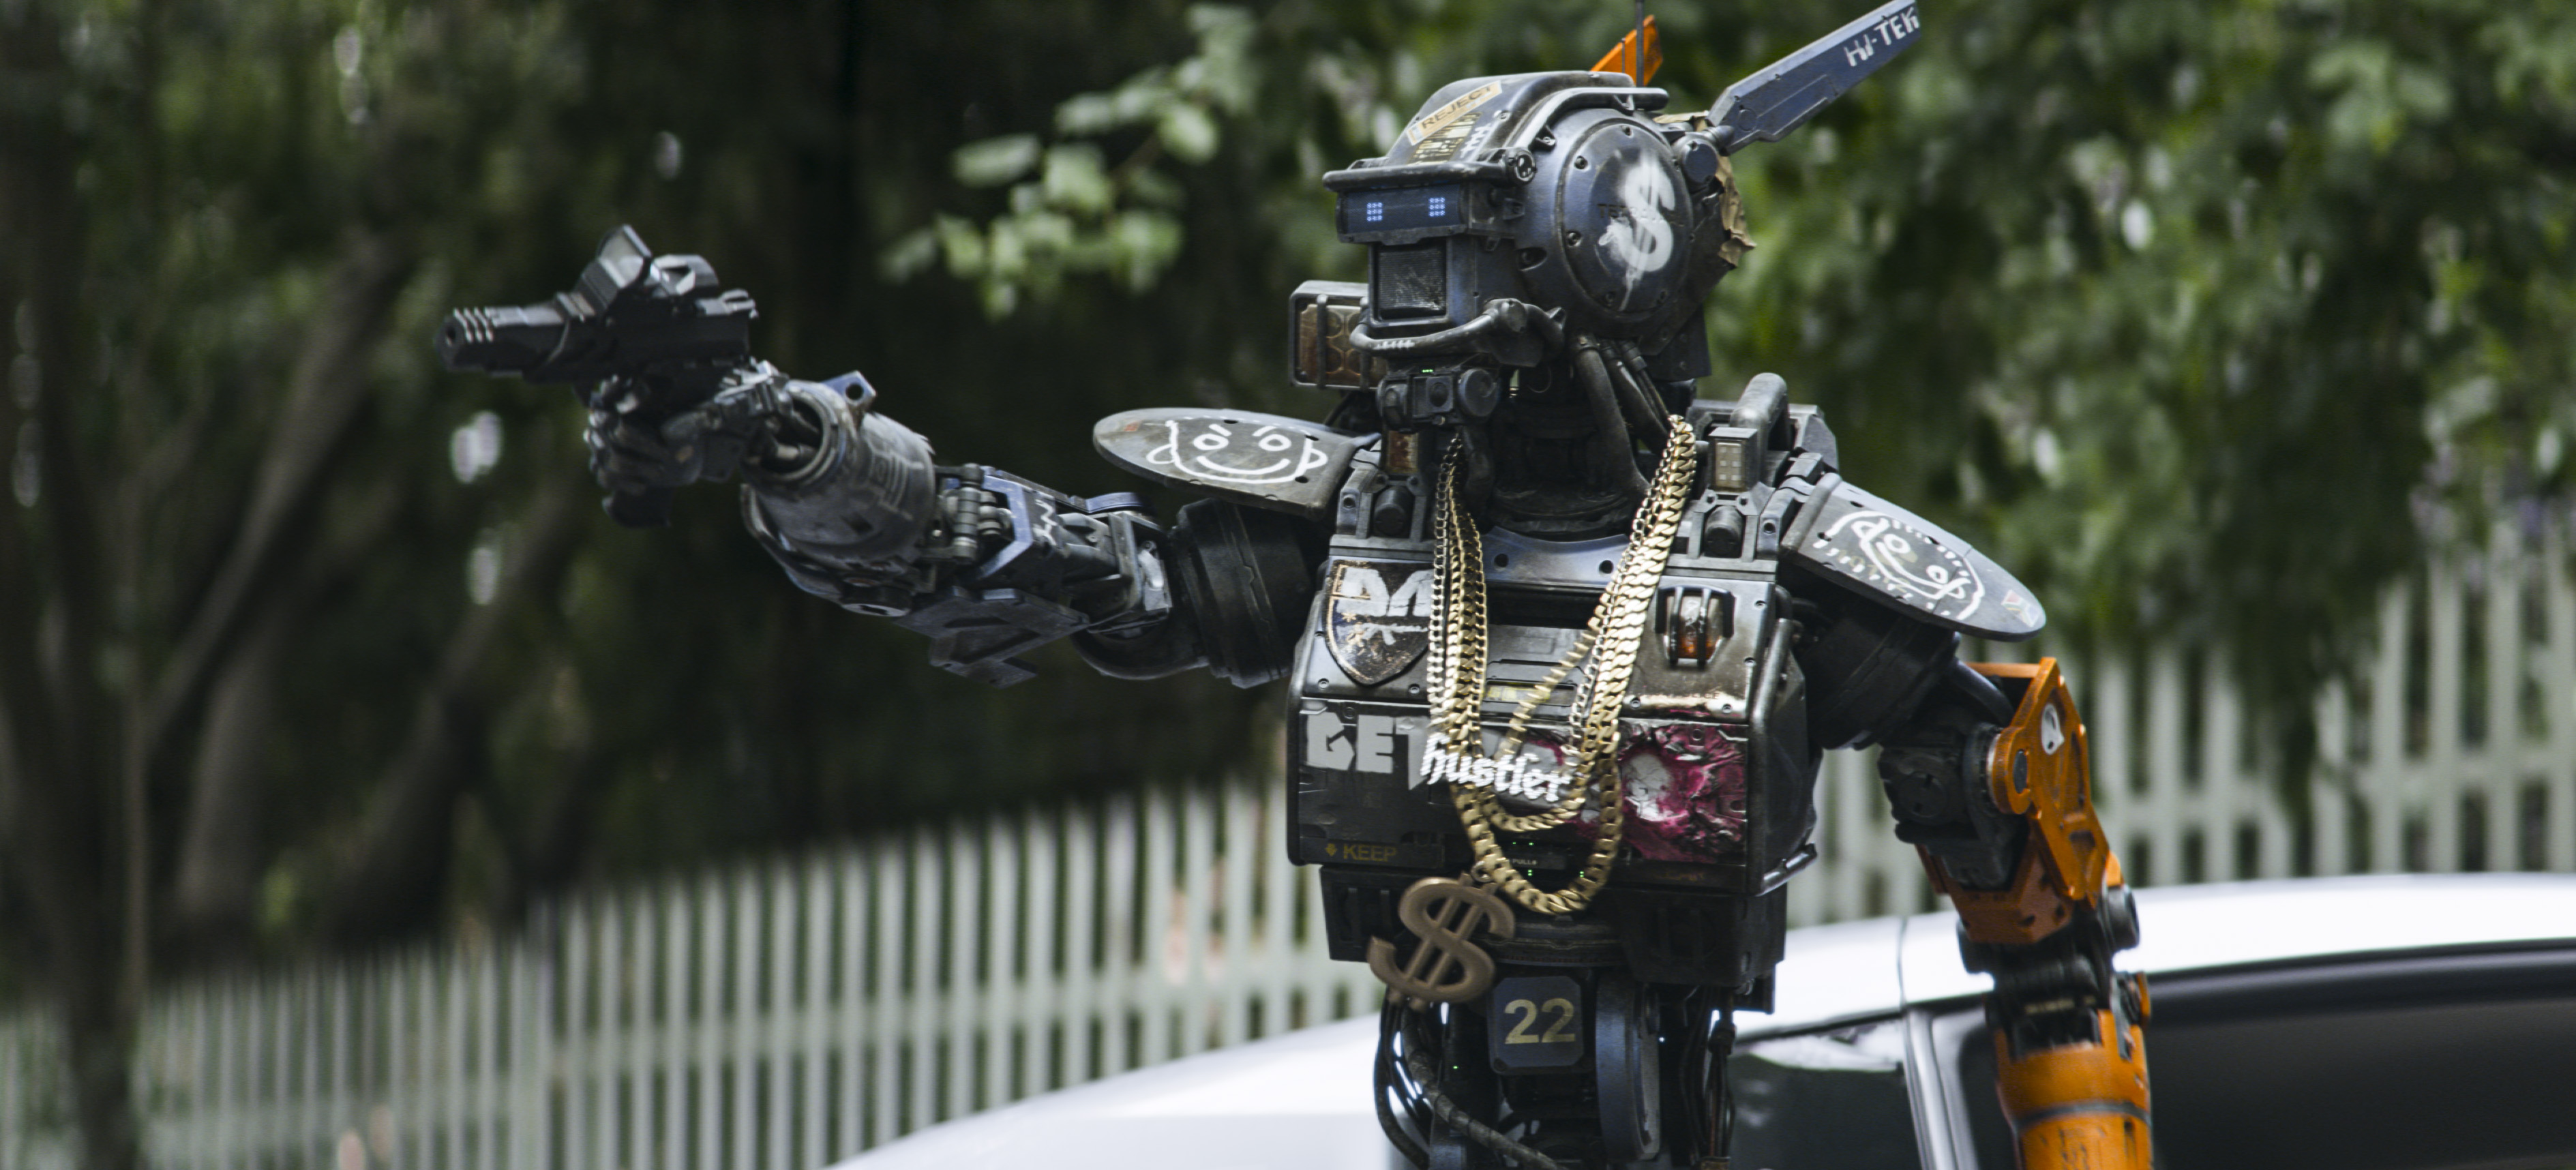 Chappie wallpapers for desktop, download free Chappie pictures and  backgrounds for PC 